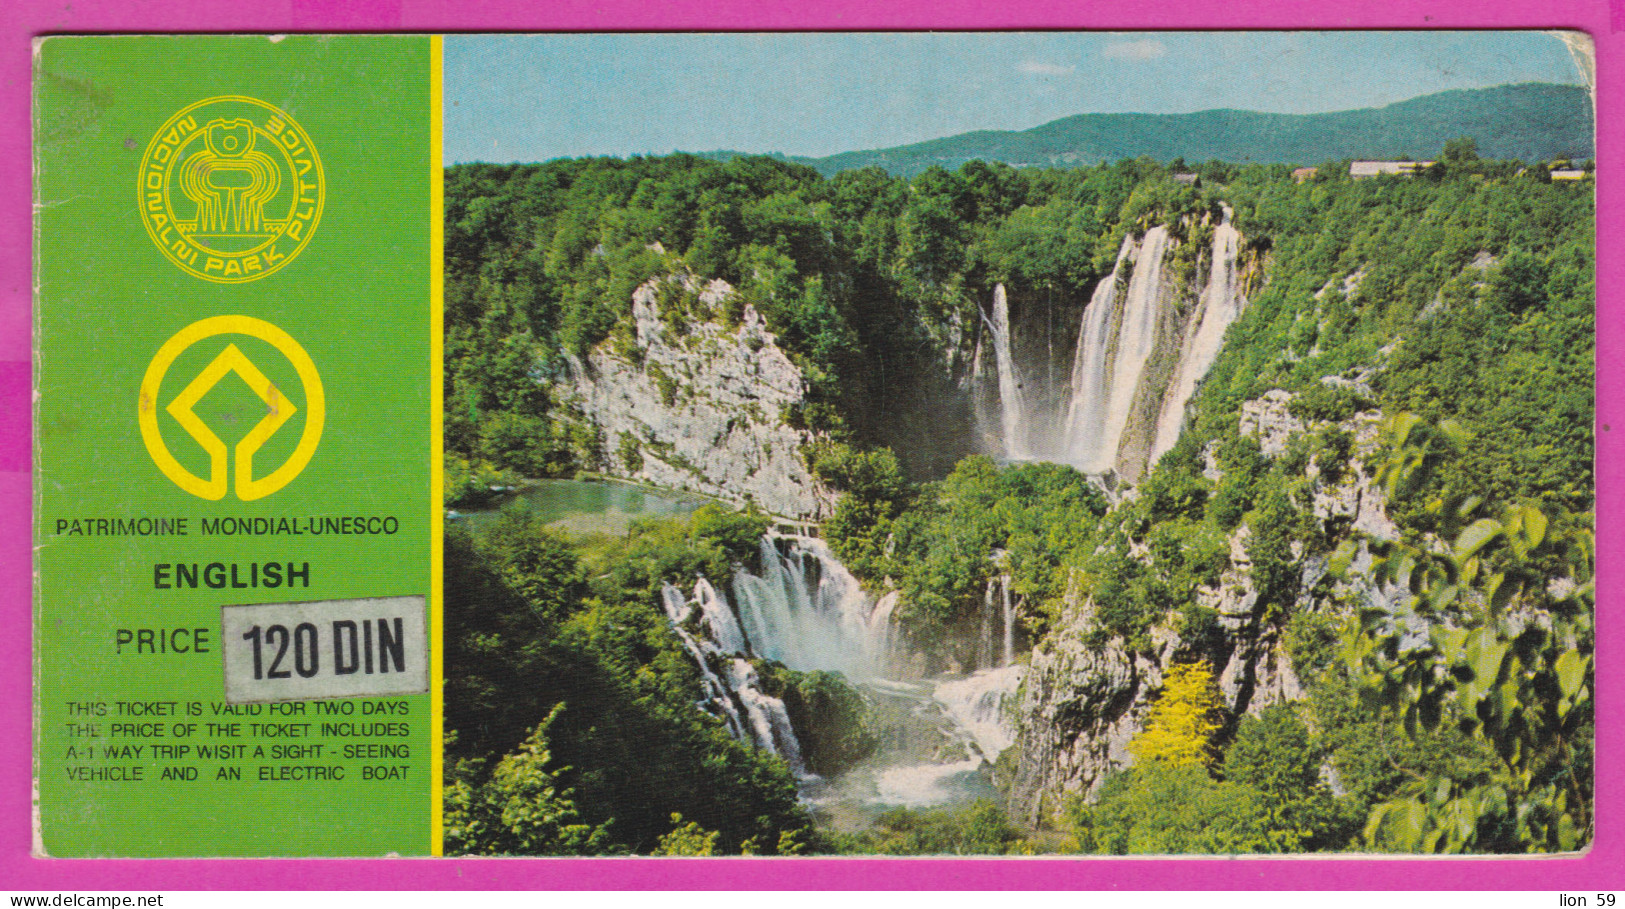 291881 / Croatia Plitvice Lakes Nat Park Price Ticket Includes A-1 Way Trip With A Sight Seeing Vehicle An Electric Boat - Europe